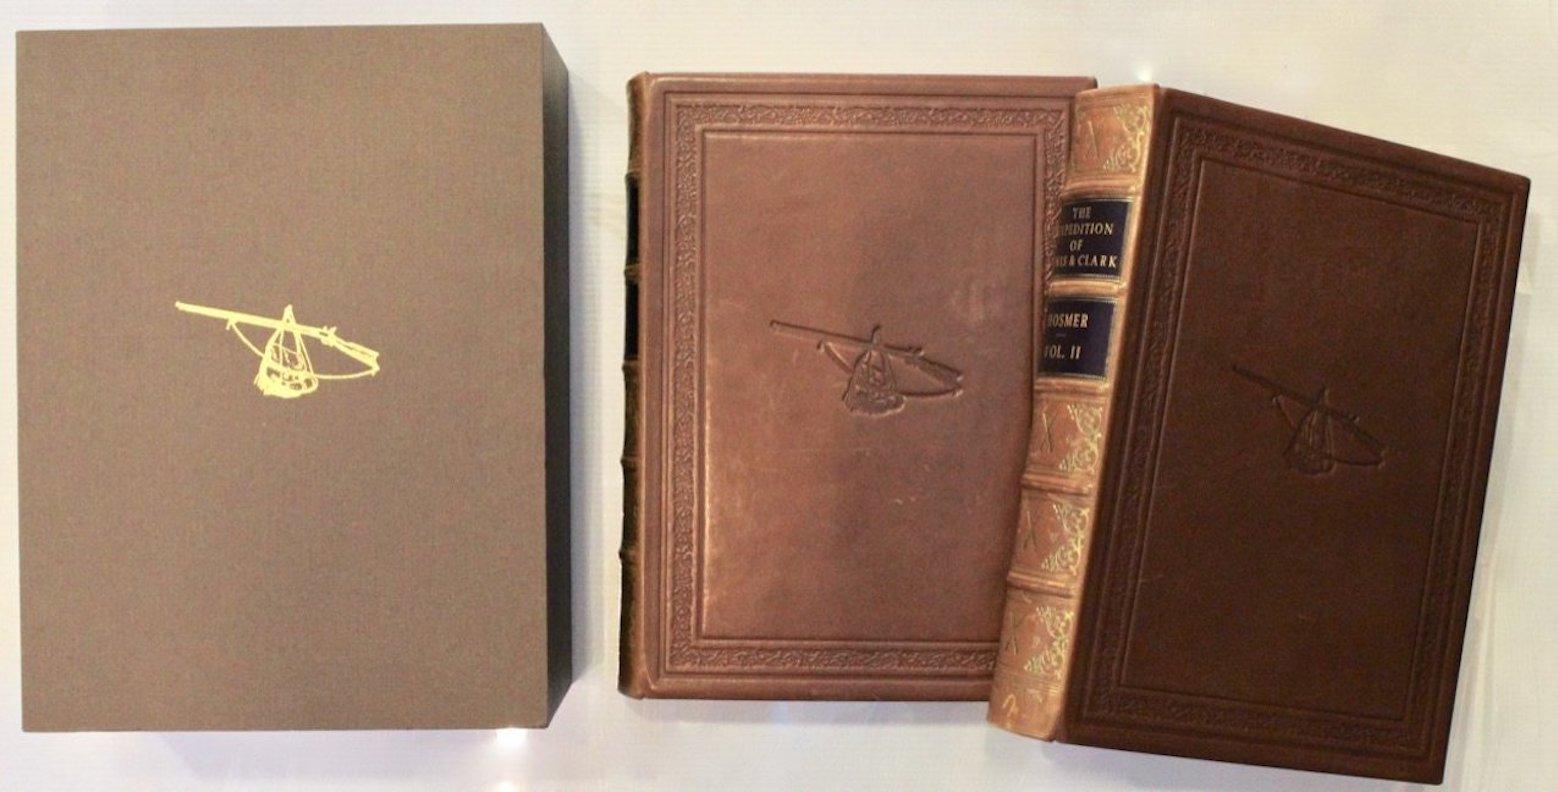 History of the Expedition of Captains Lewis and Clark, 1804-5-6. Reprinted from the Edition of 1814. With an Introduction and Index edited by James Kendall Hosmer and published as limited edition reprinted of the 1814 edition. This two volume